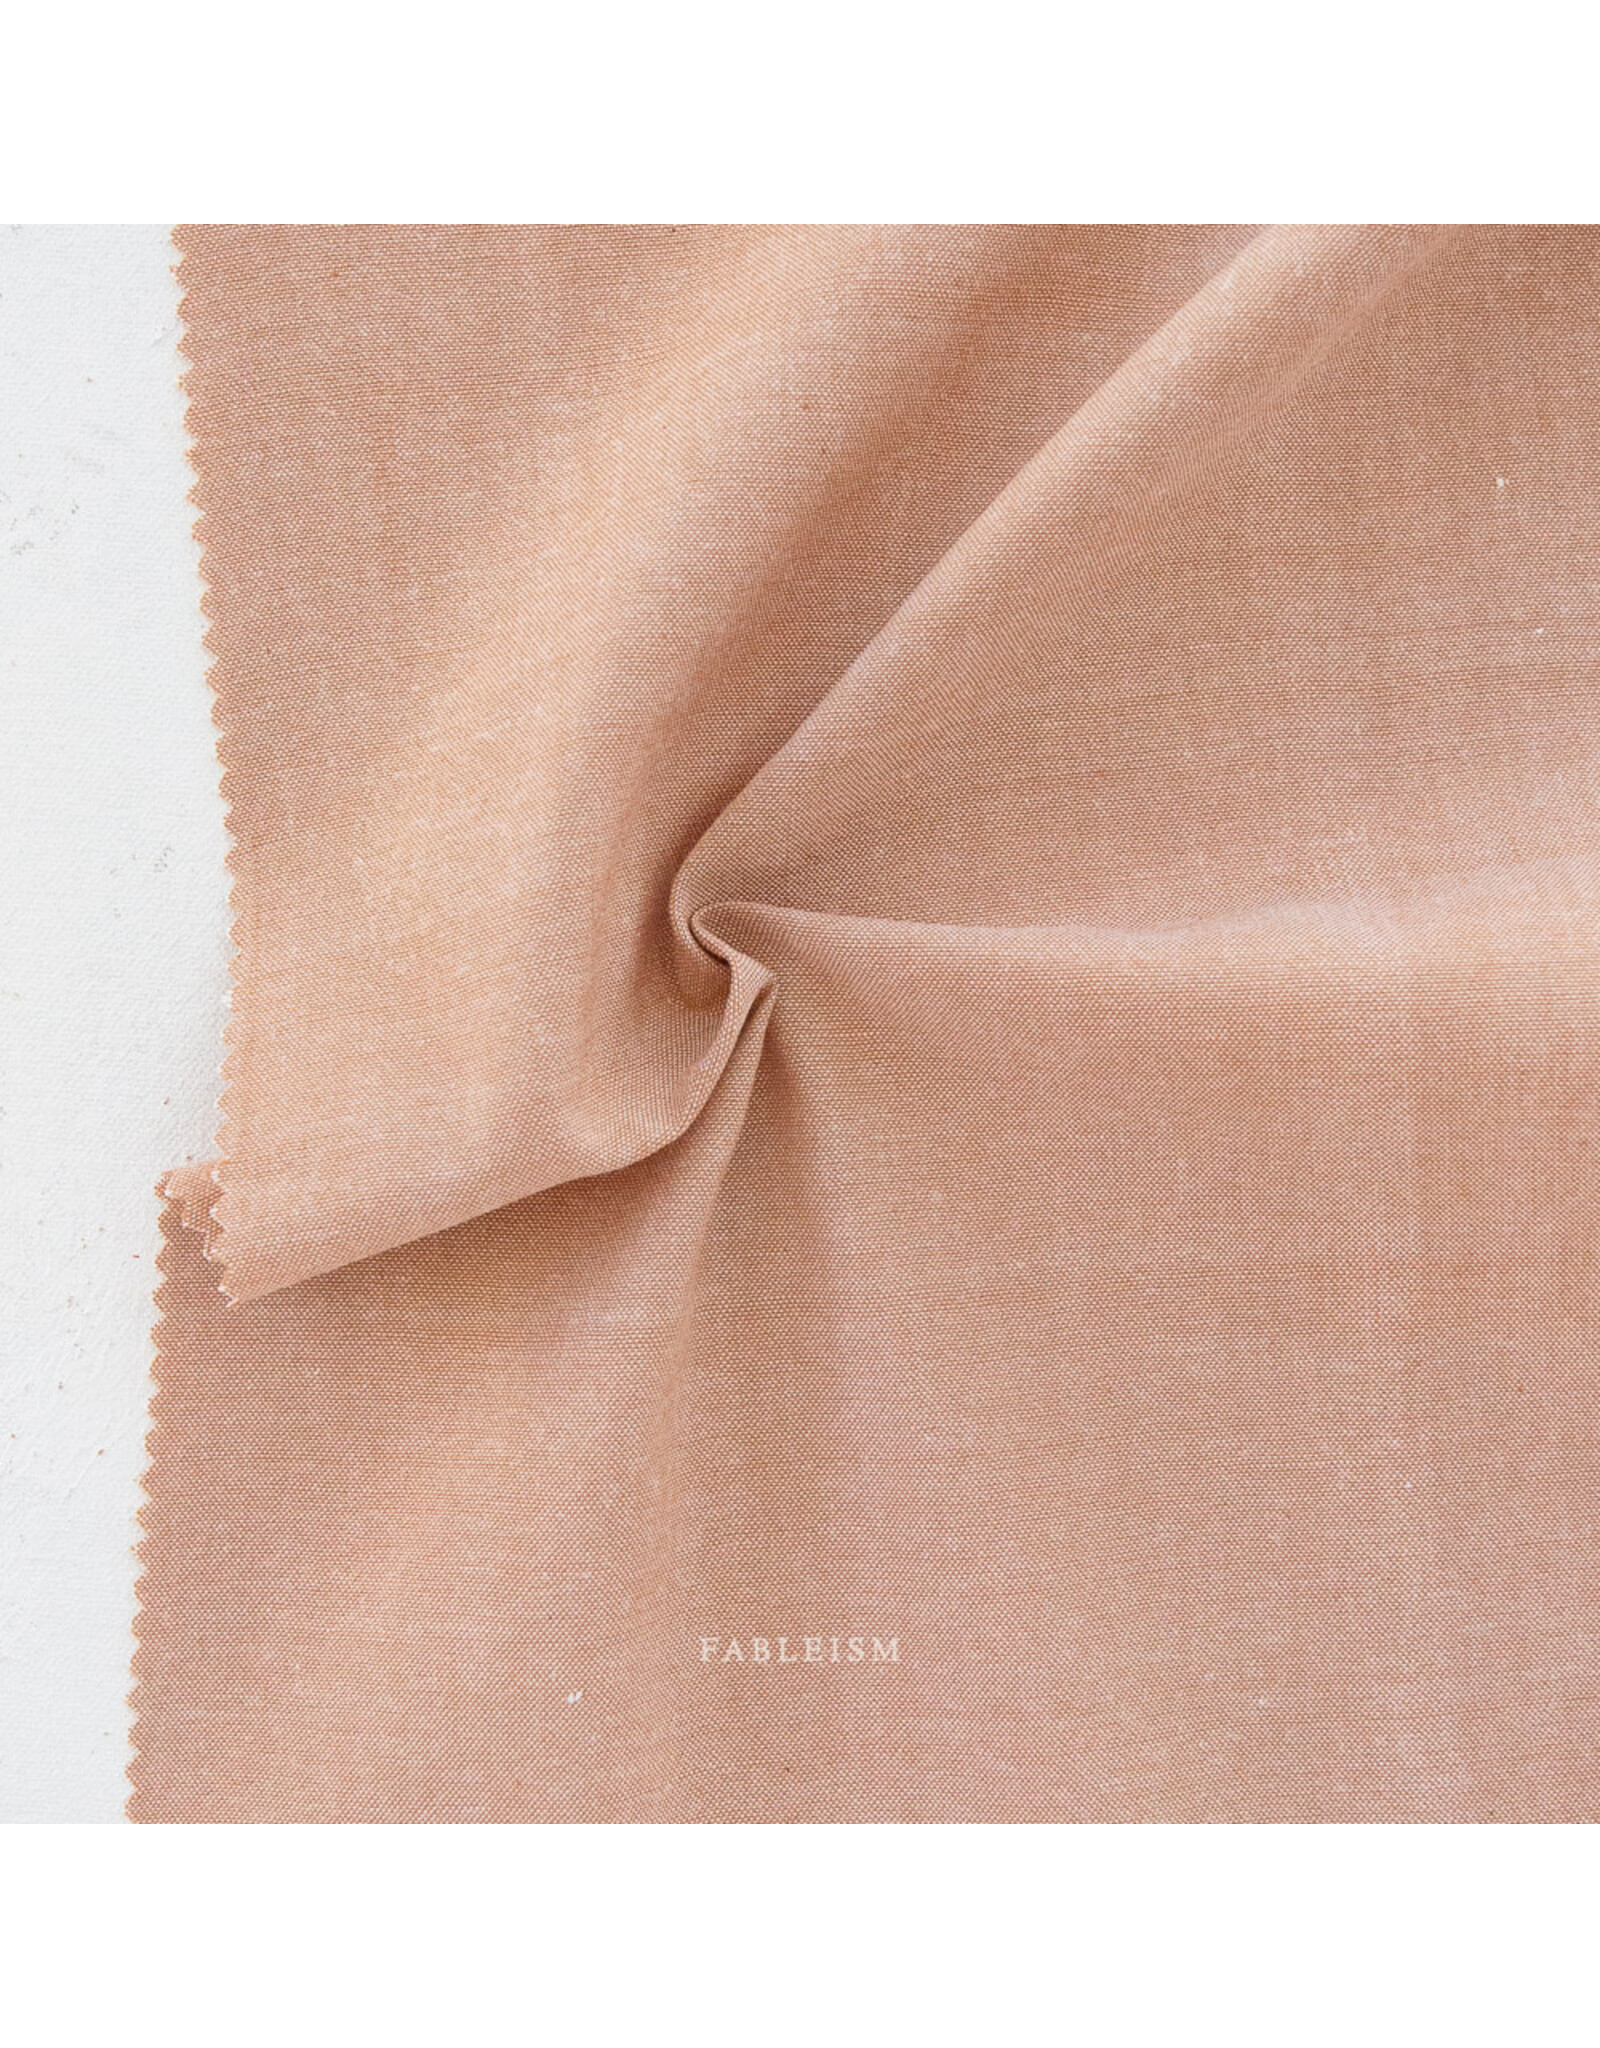 Fableism Everyday Chambray, Clay Pot, Fabric Half-Yards